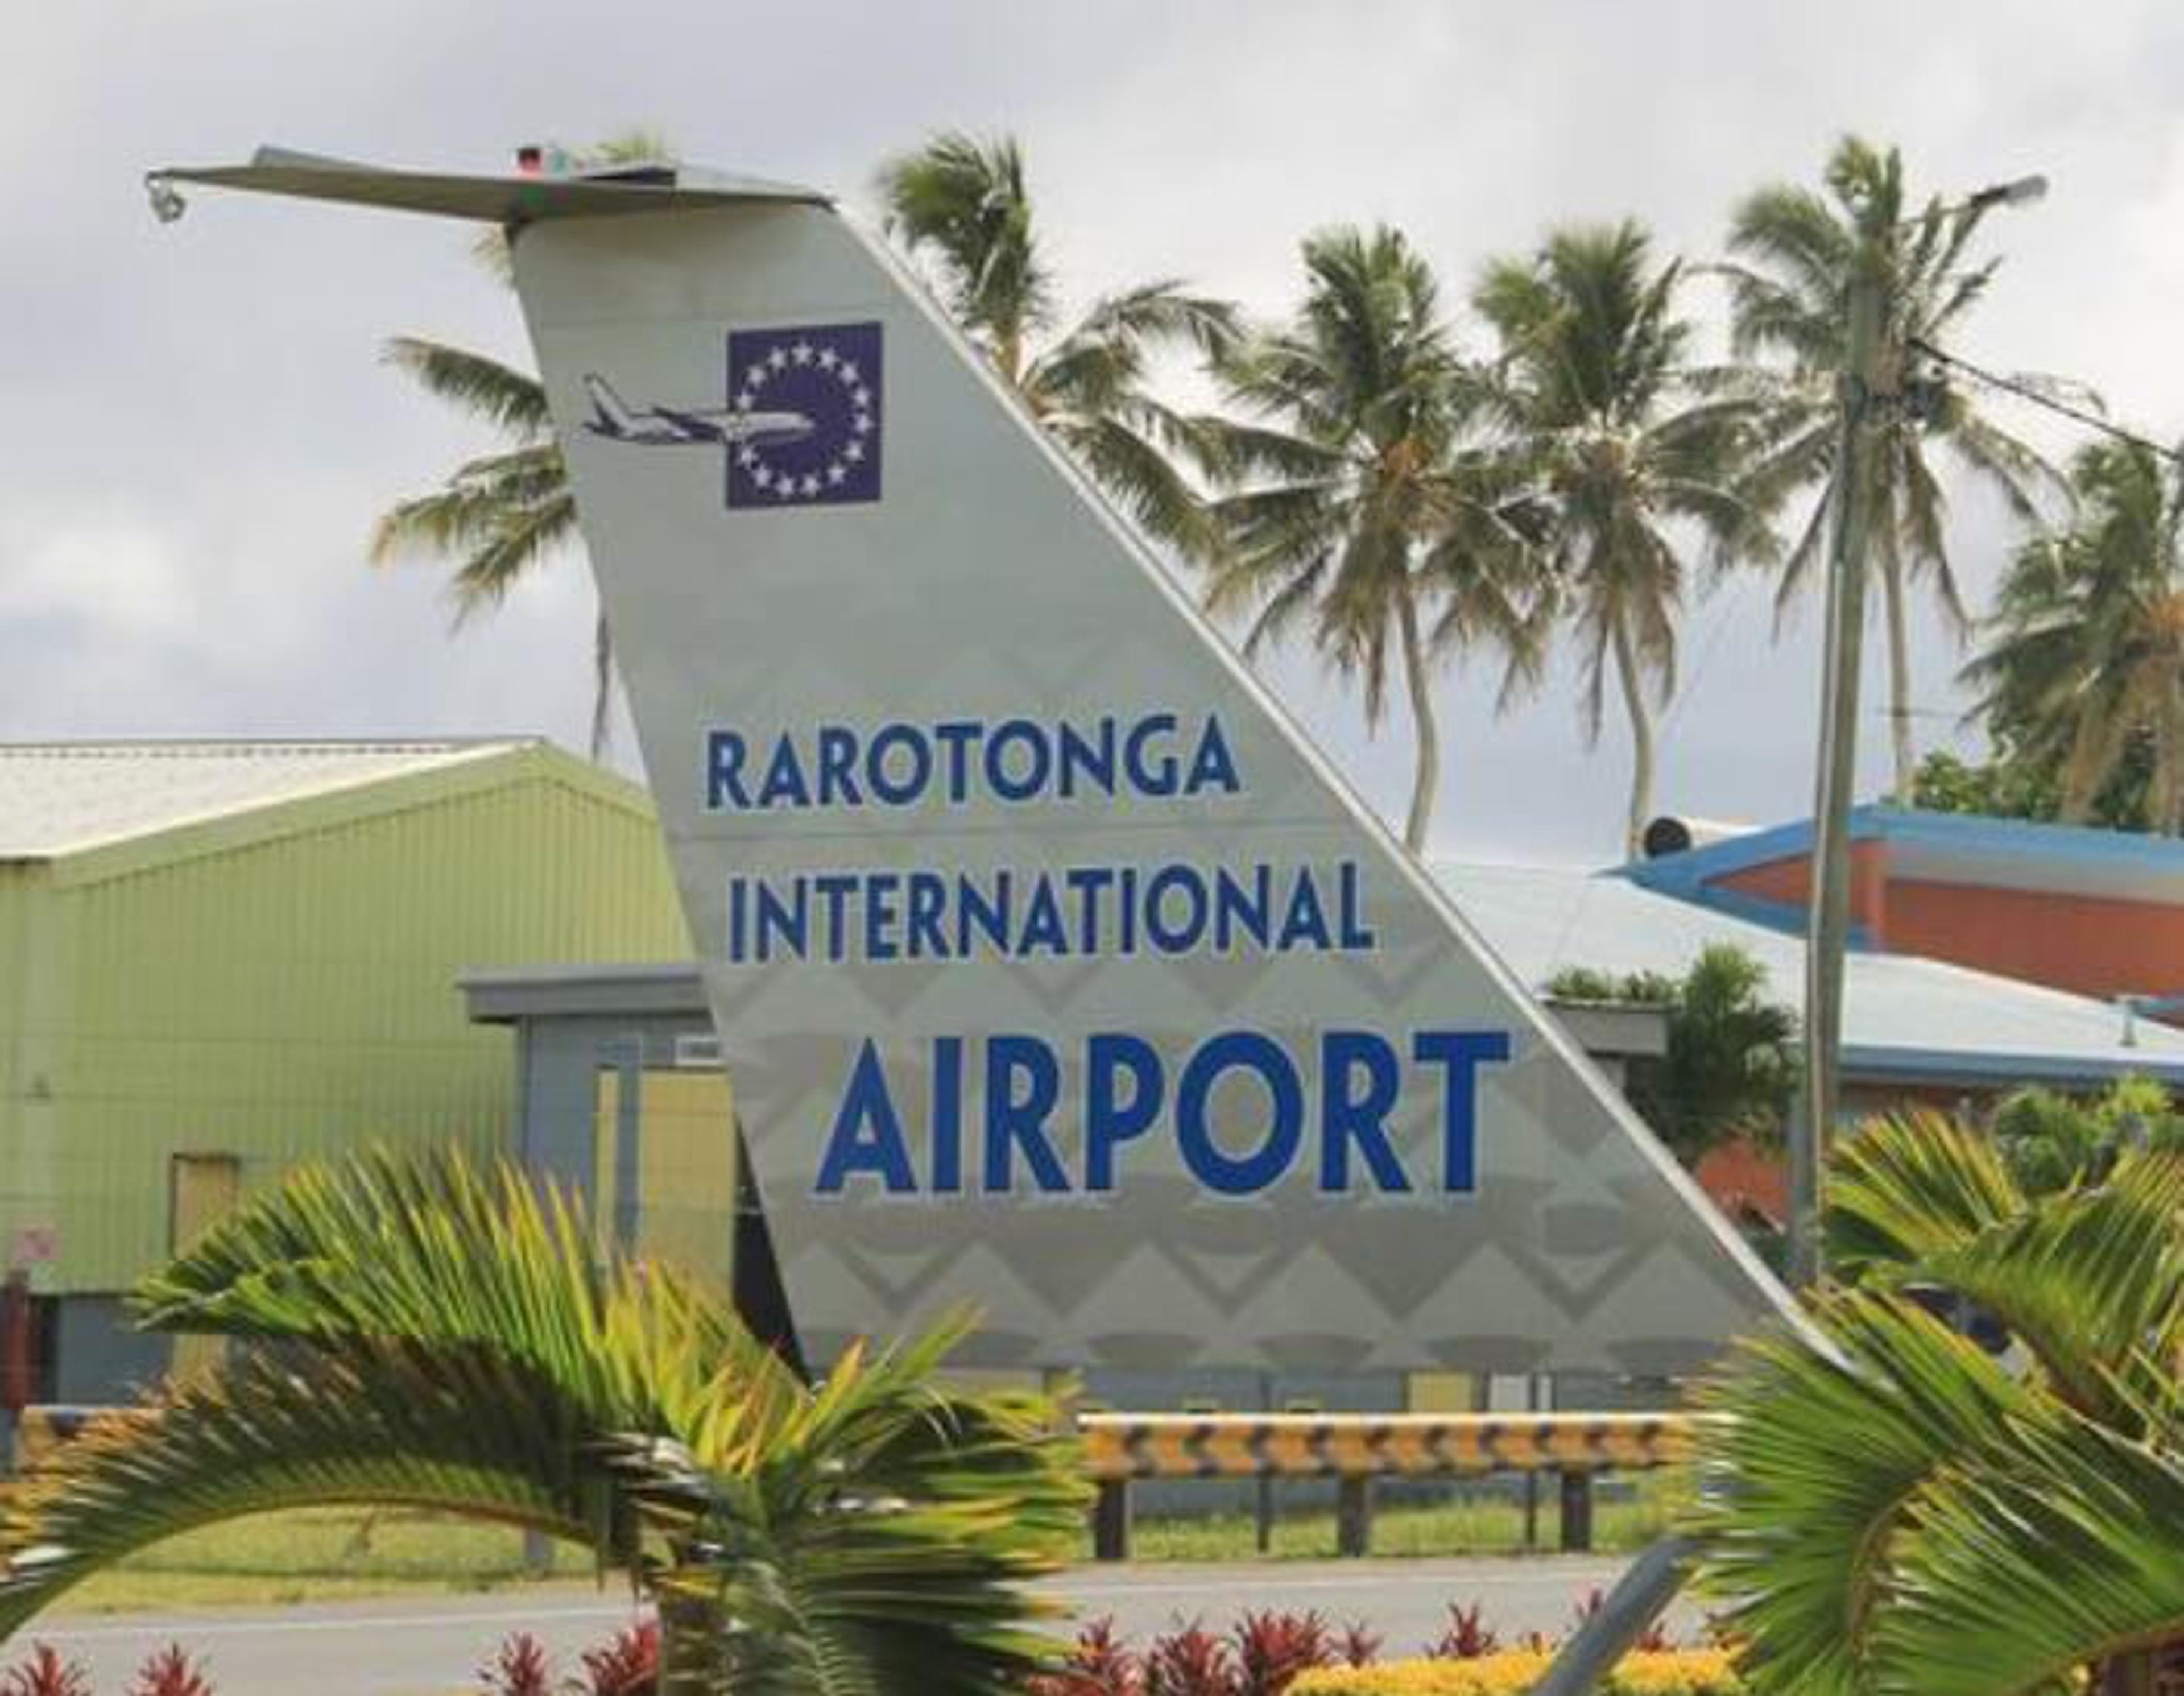 Tourism operators in the Cook Islands are welcoming the government's easing of Covid-19 restrictions.